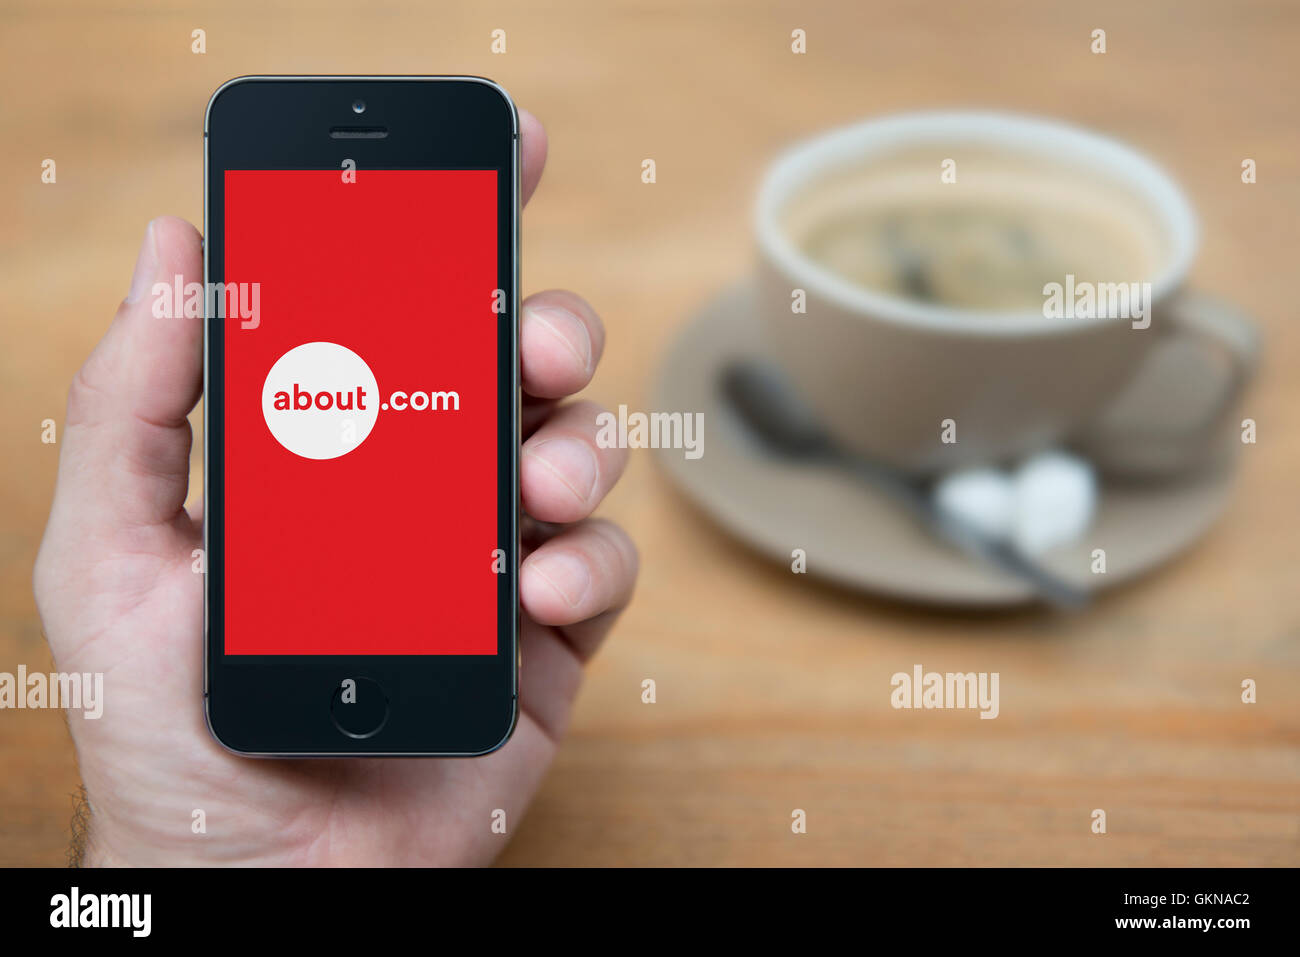 A man looks at his iPhone which displays the About.com logo, while sat with a cup of coffee (Editorial use only). Stock Photo